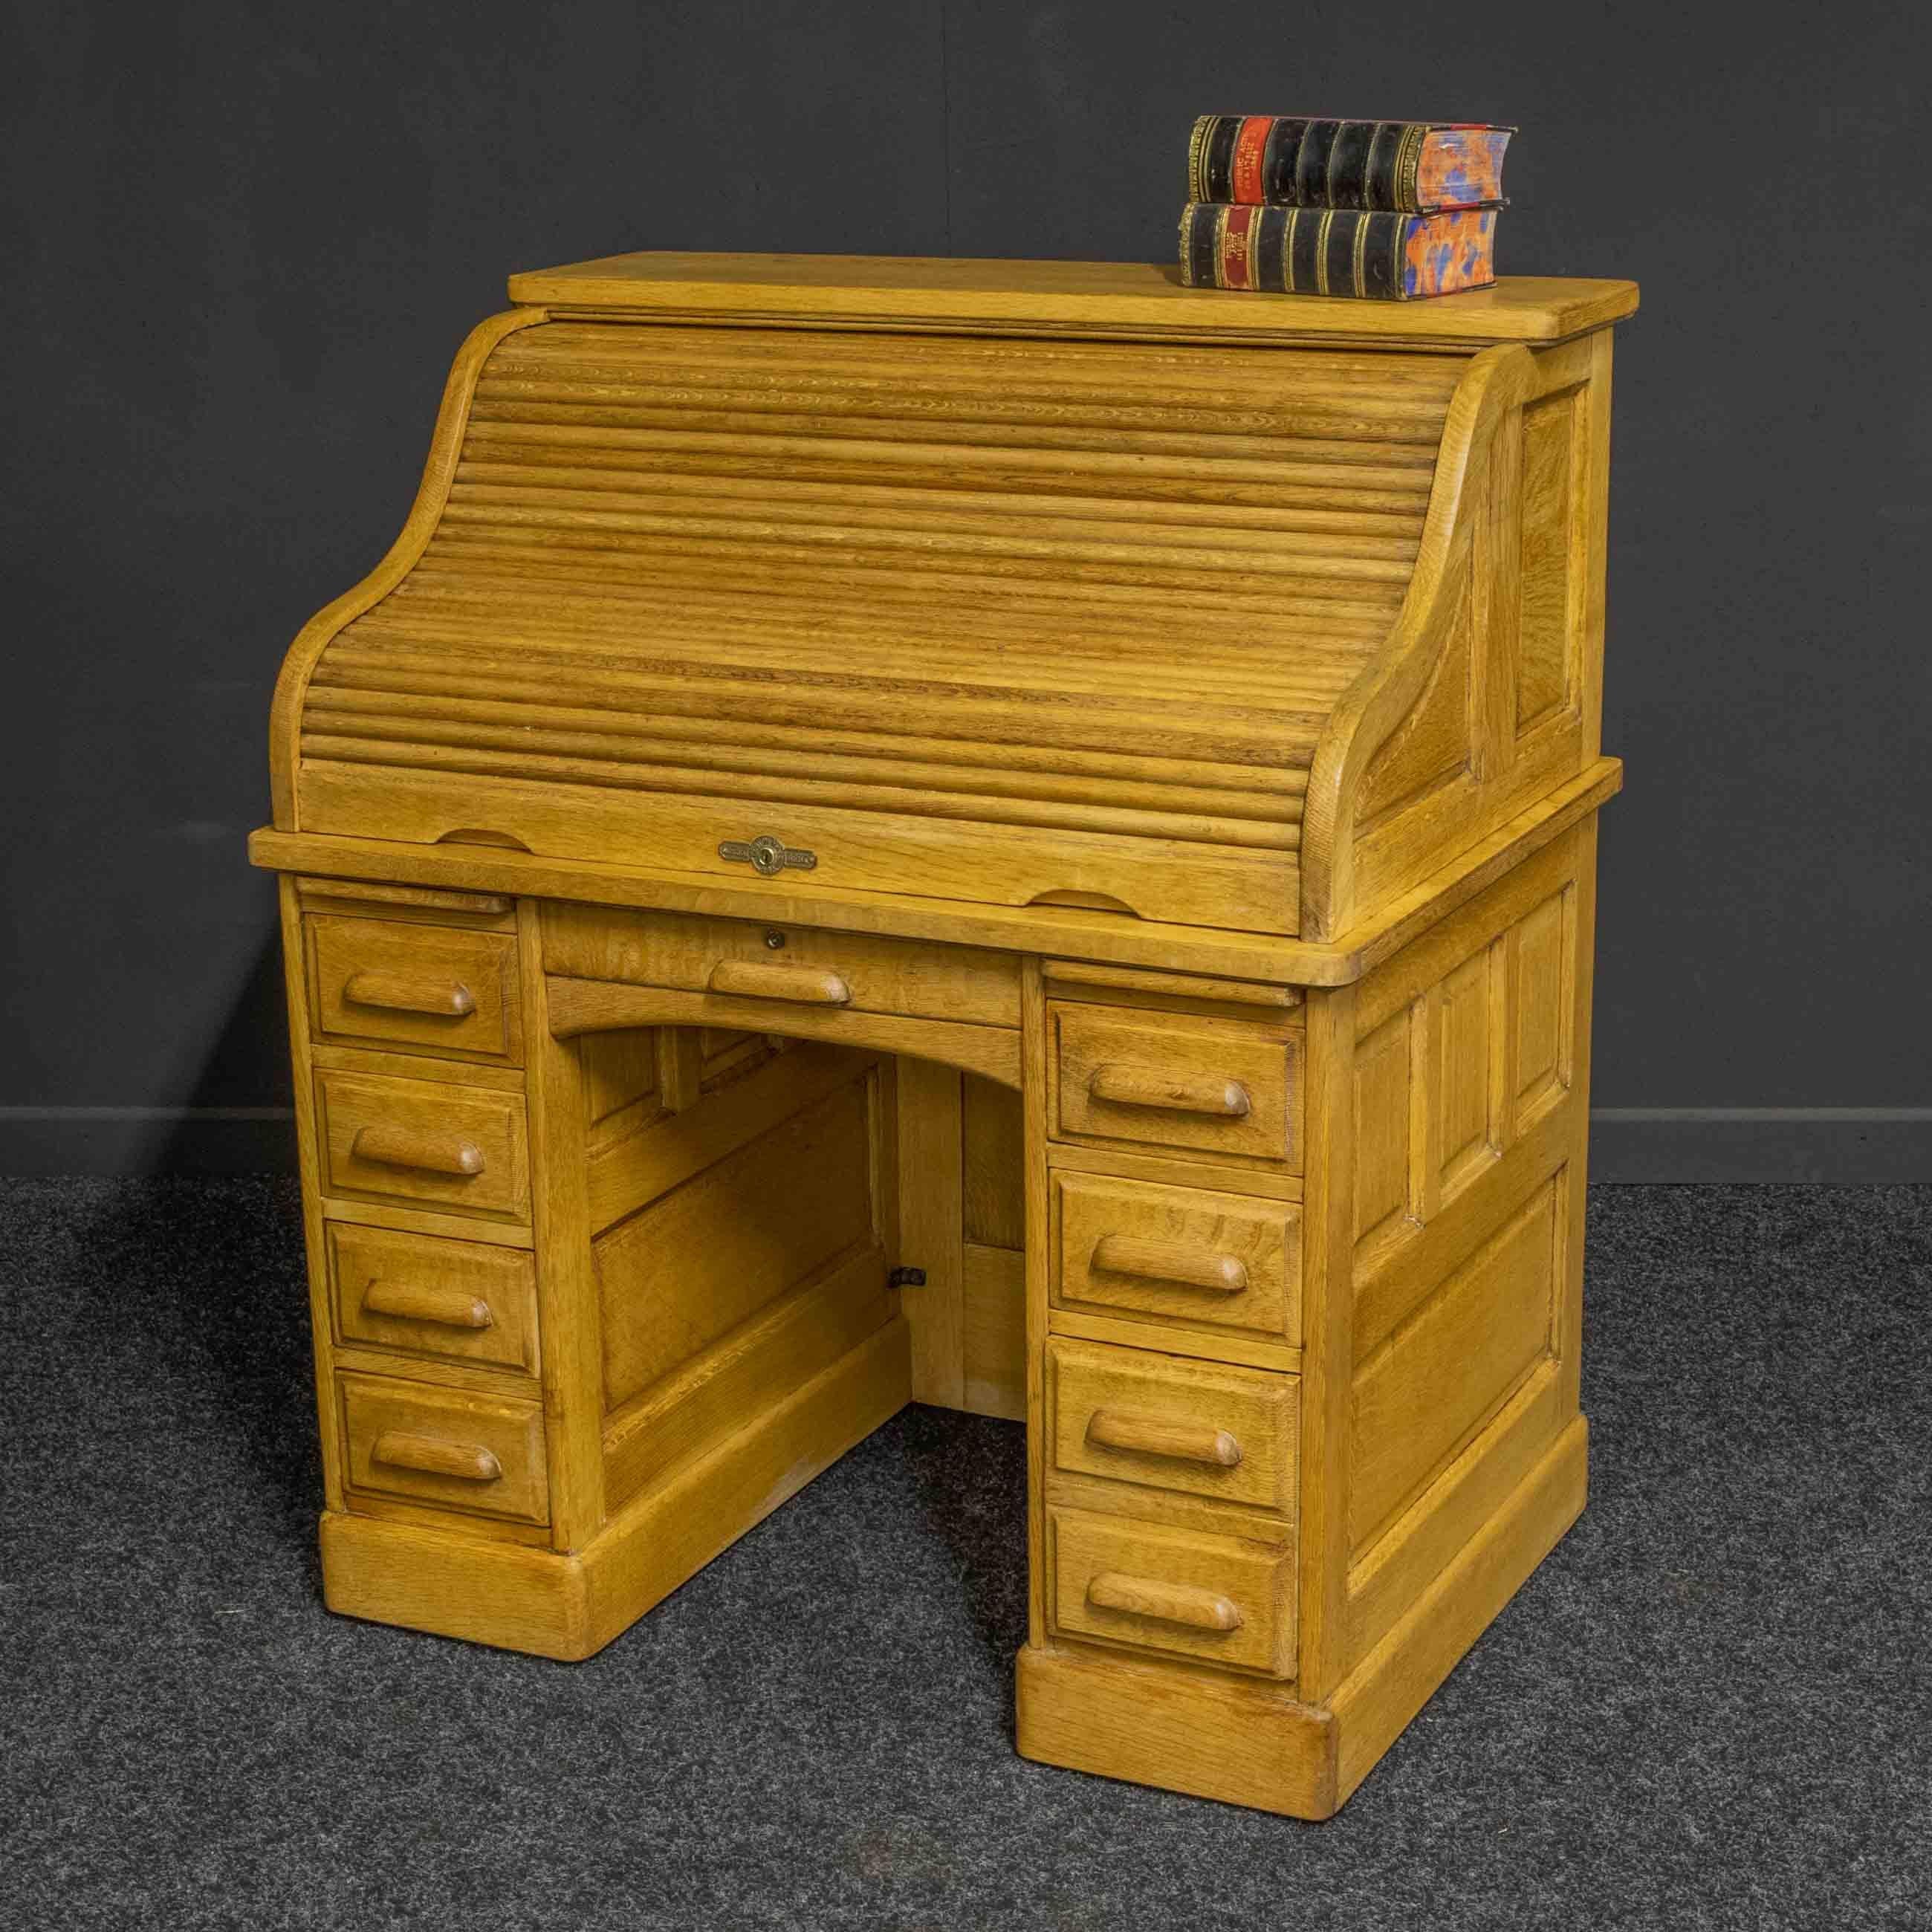 A small and attractive American roll top desk made by the 'Derby' company based in Boston. Unusual to find one in a natural oak finish and wax polished and in very good condition. When the roll is closed all the side drawers automatically lock. This